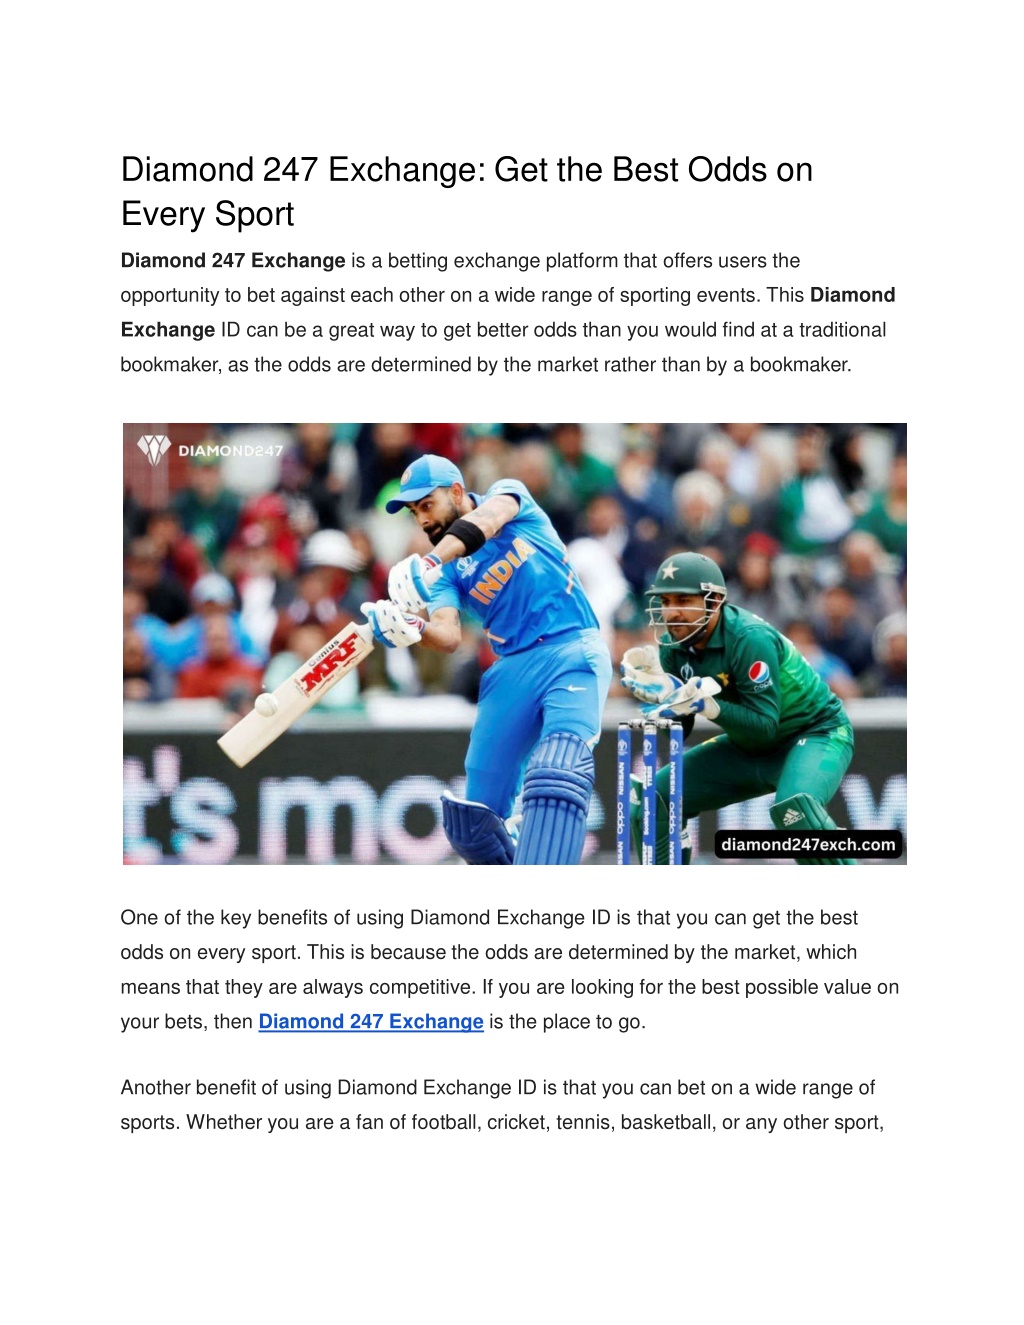 PPT - Diamond 247 Exchange Get the Best Odds on Every Sport